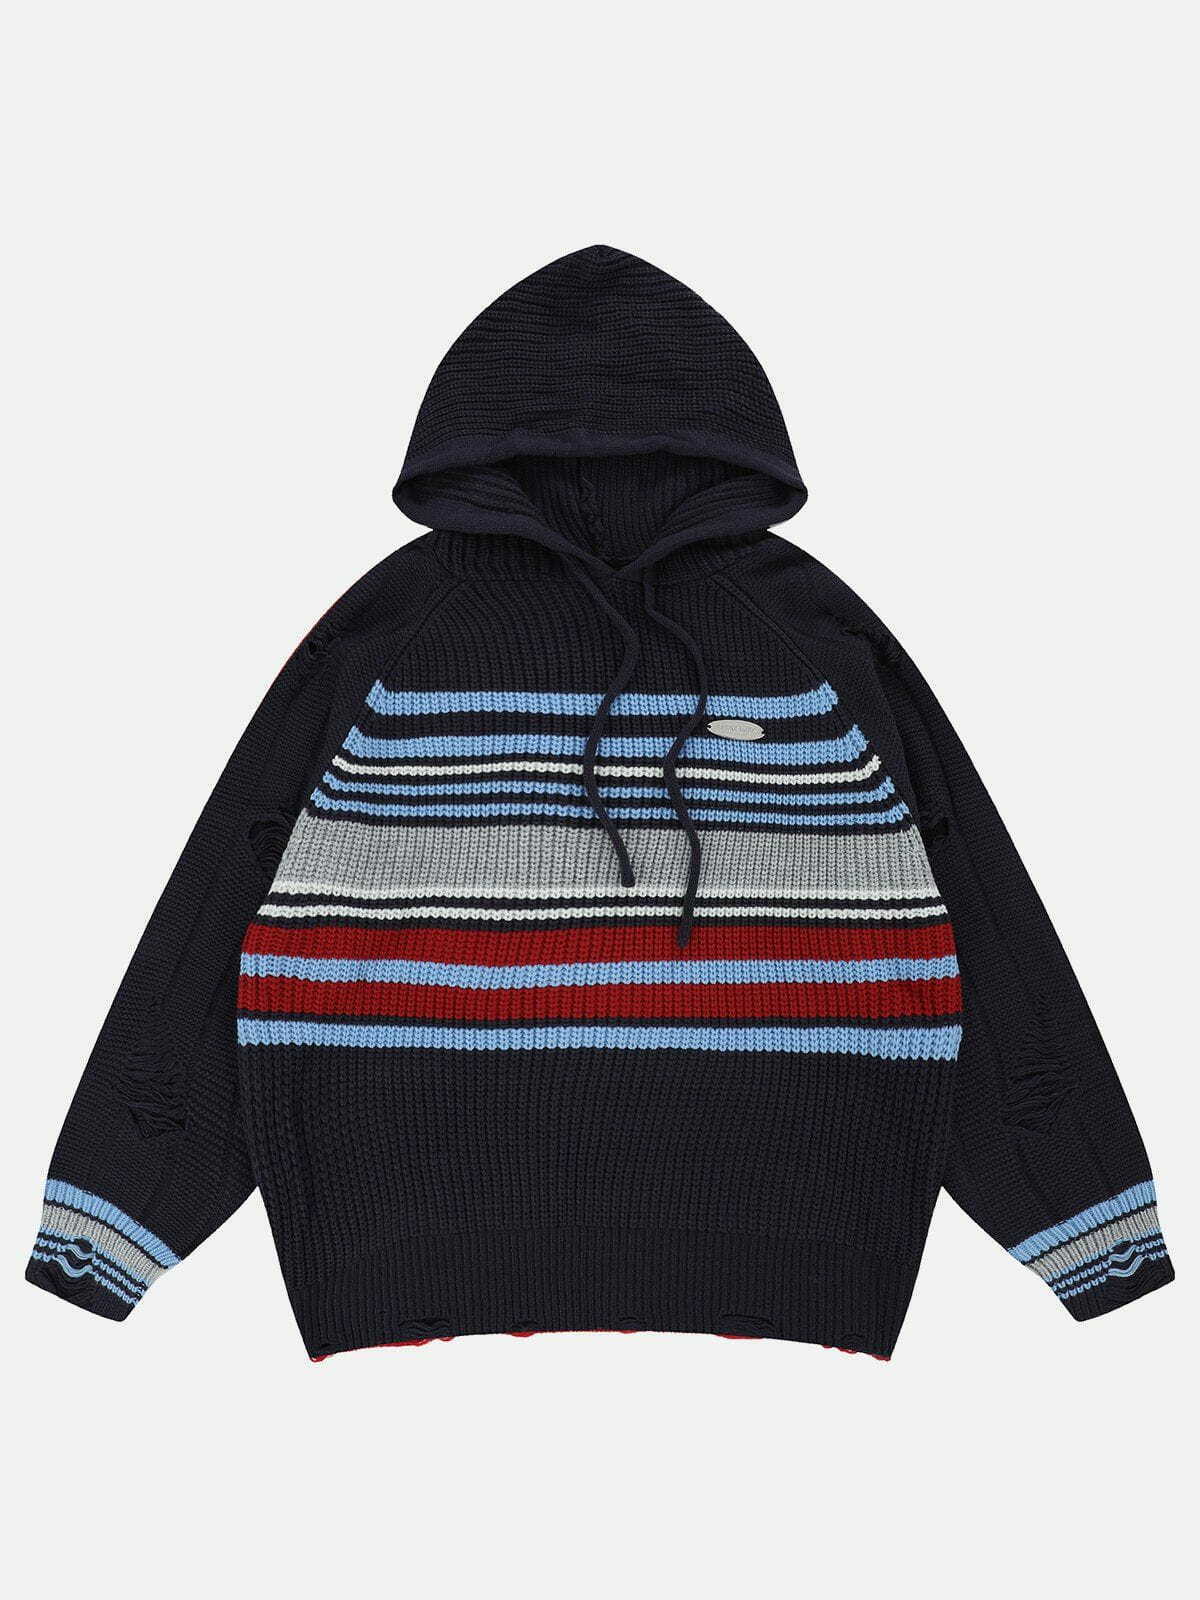 youthful stripes knit hoodie   chic & urban comfort 8998